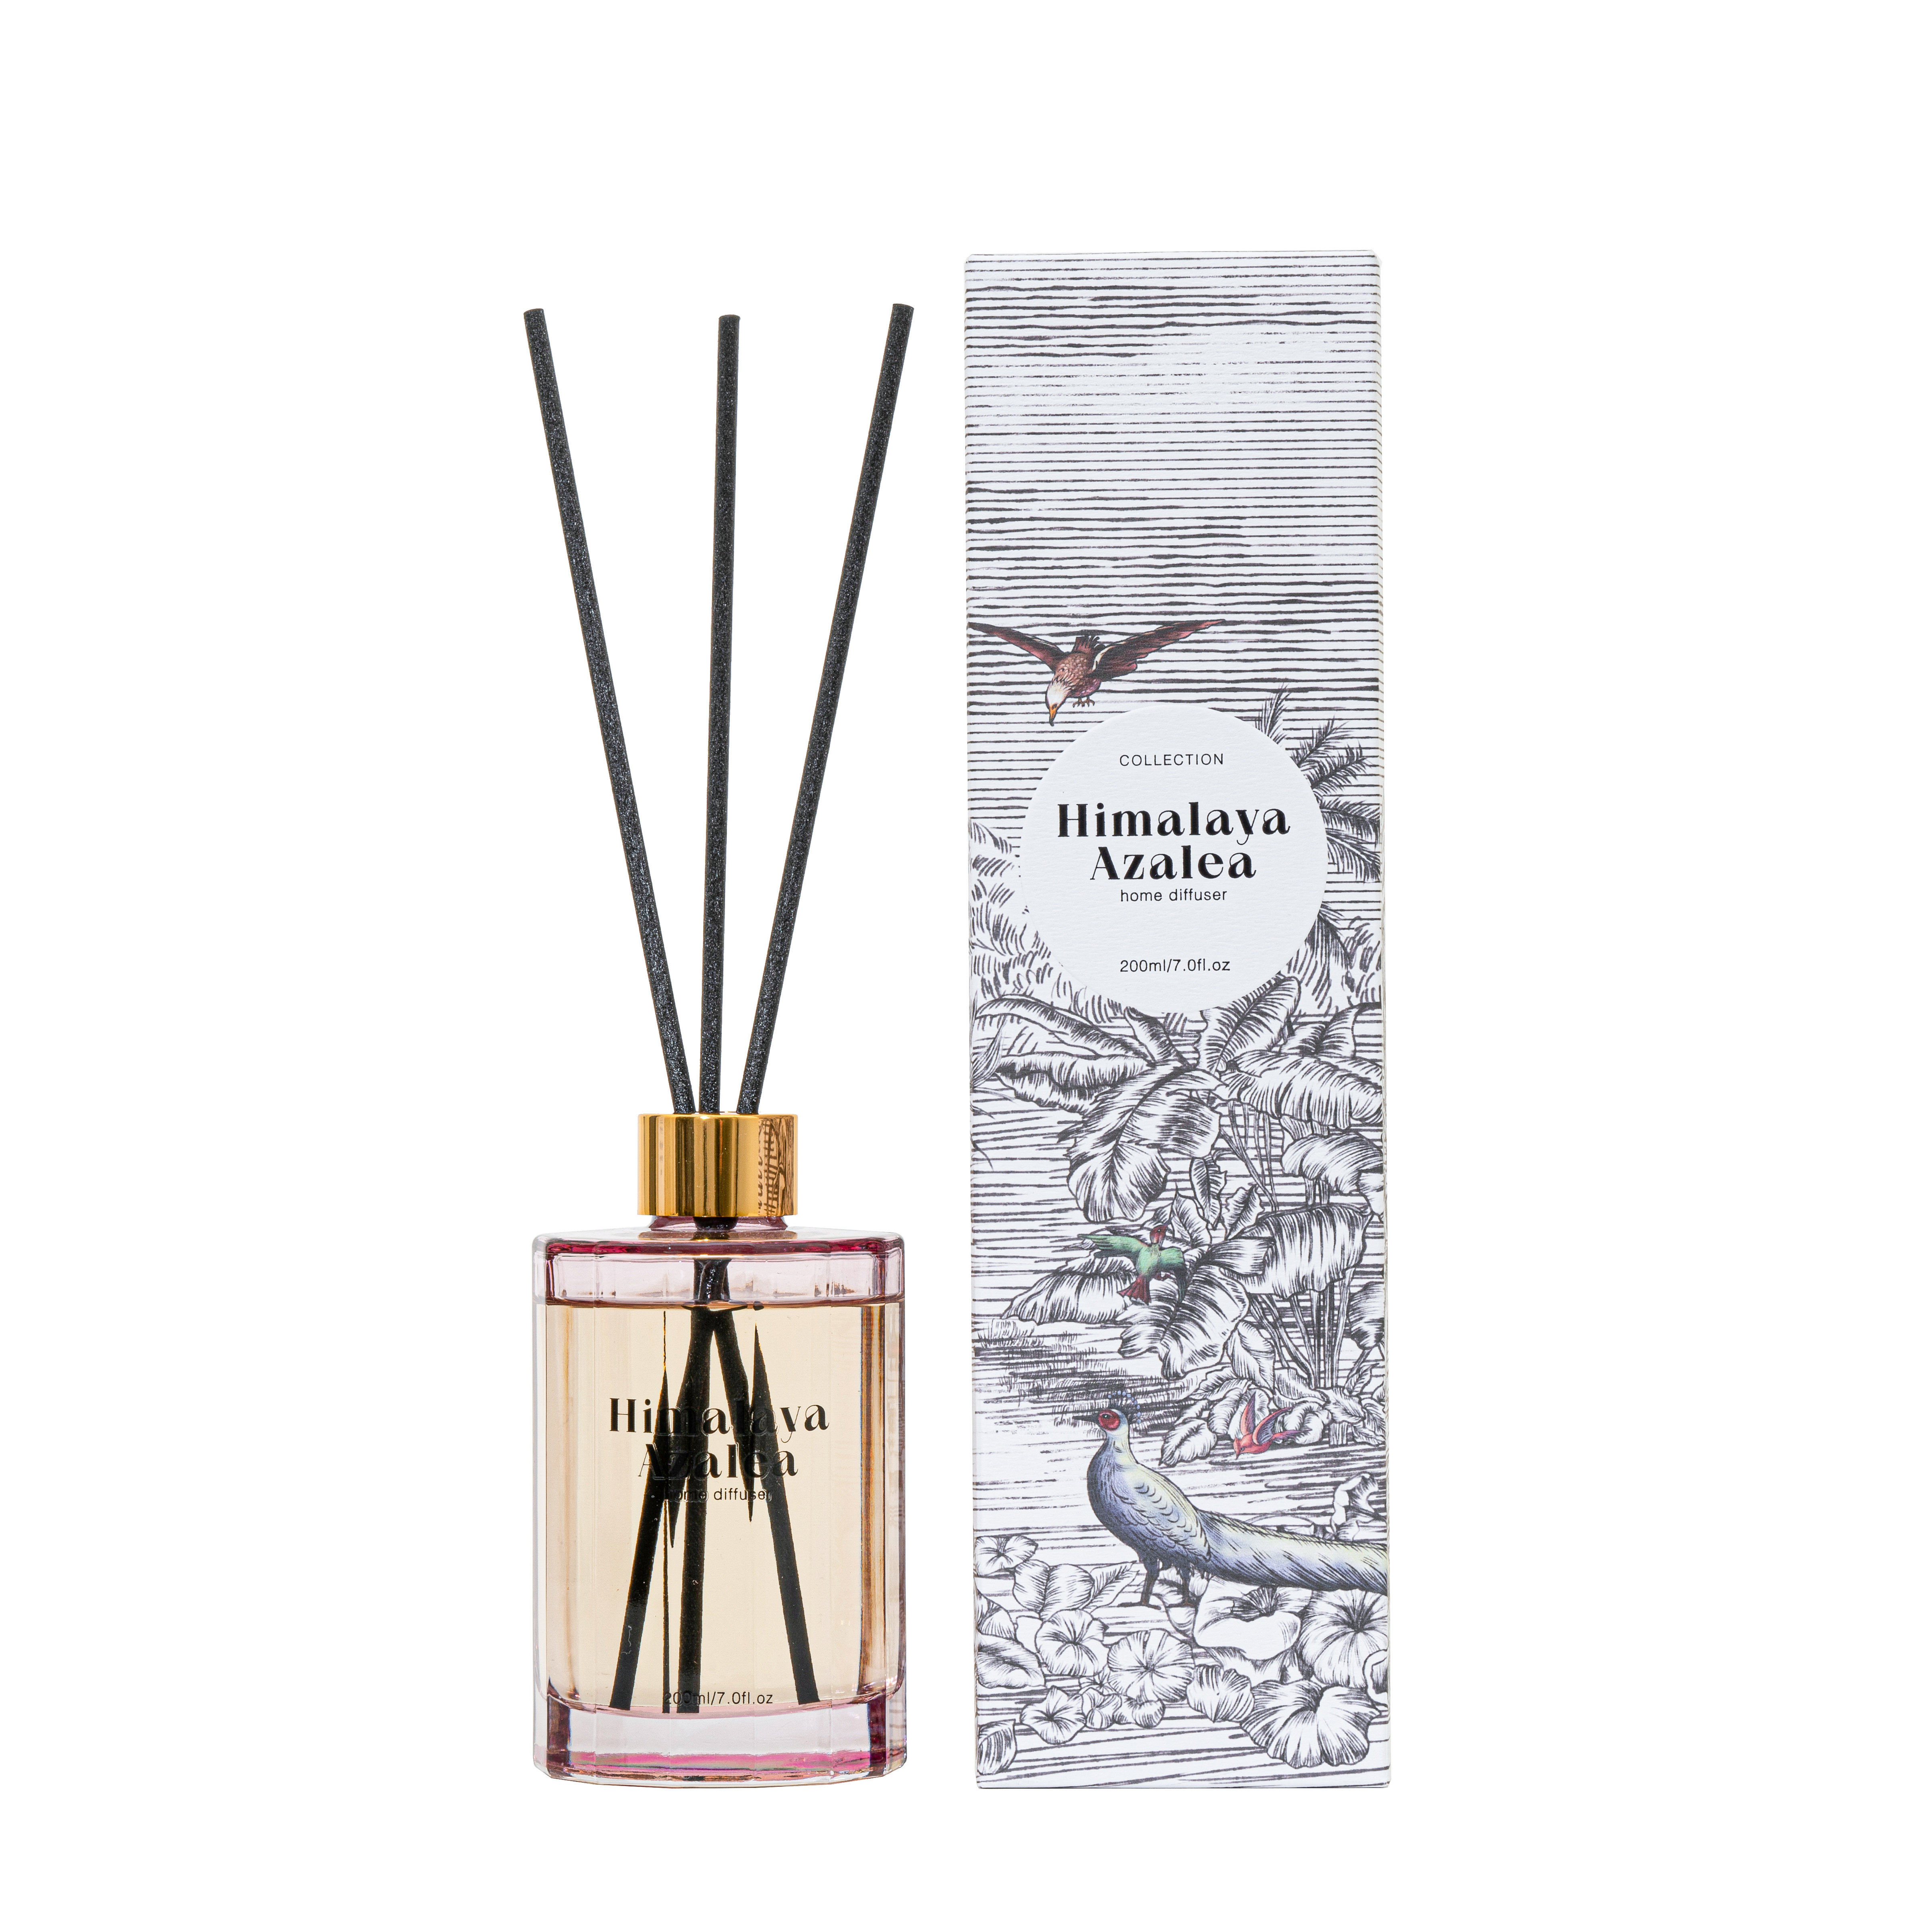 WOODWICK IS ON Collection Himalaya Azalea Pink Reed Diffuser 200ml 